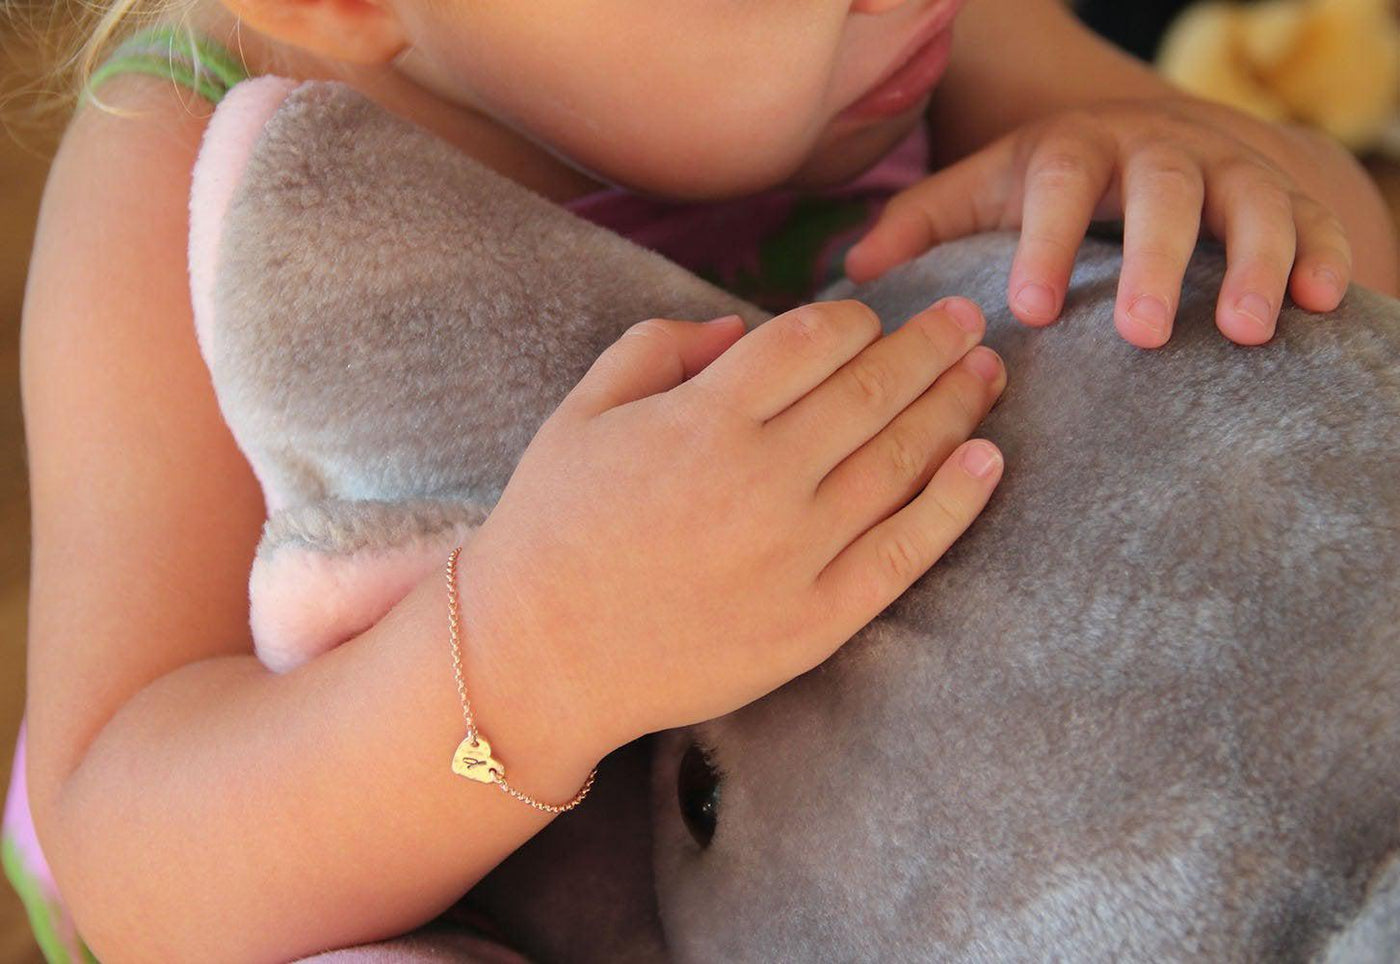 Infant's rose gold chain bracelet with heart charm and personalized initial letter